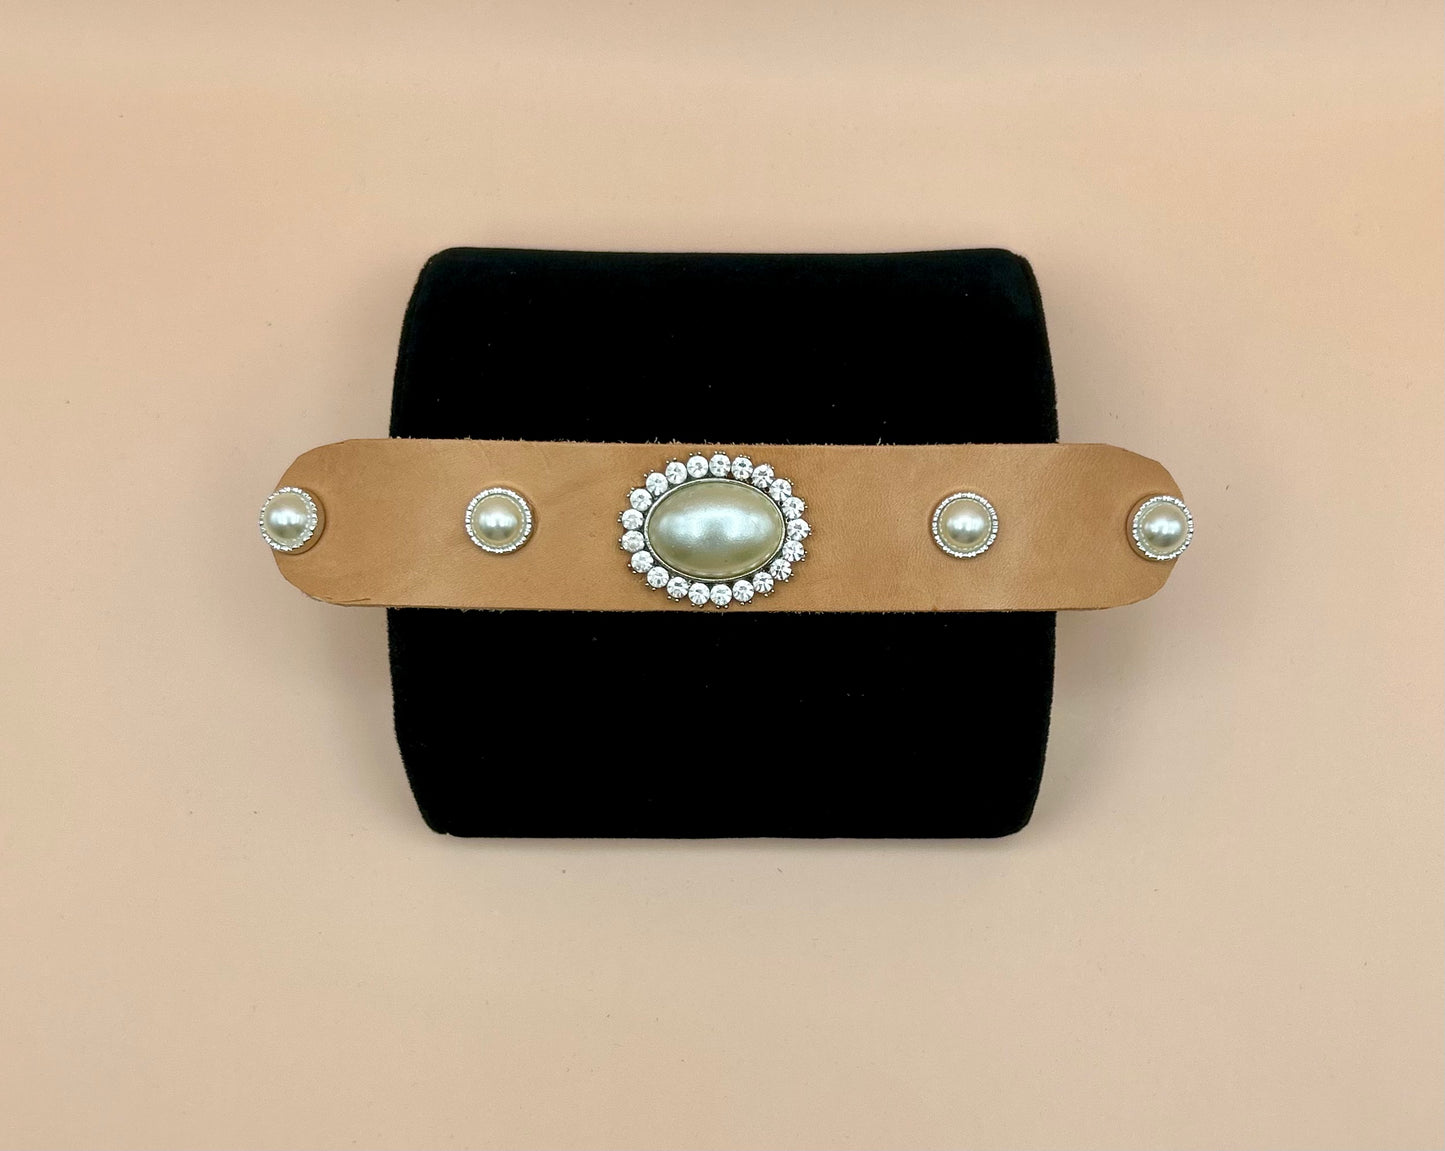 #49 Light Tan Leather Bracelet with Large Pearl surrounded by Crystals Button 7in